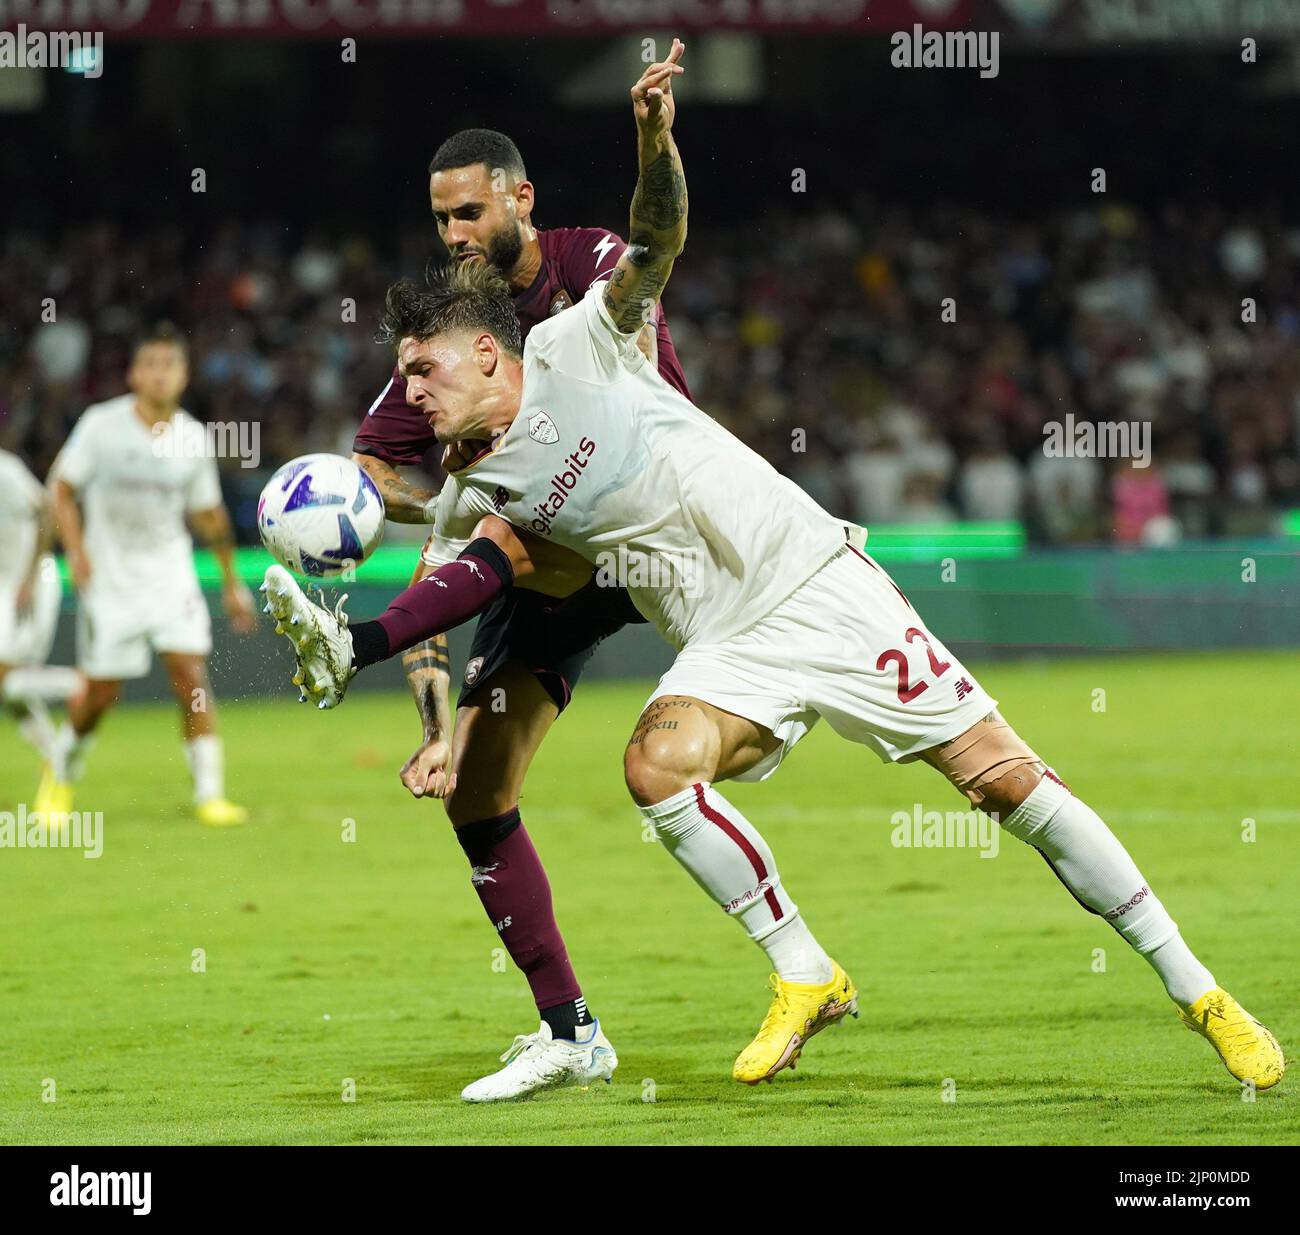 Salerno, Italy. 14th Aug, 2022. Roma's Nicolo Zaniolo (R) vies with Salernitana's Dylan Bronn during their Serie A football match in Salerno, Italy, on Aug. 14, 2022. Credit: Str/Xinhua/Alamy Live News Stock Photo